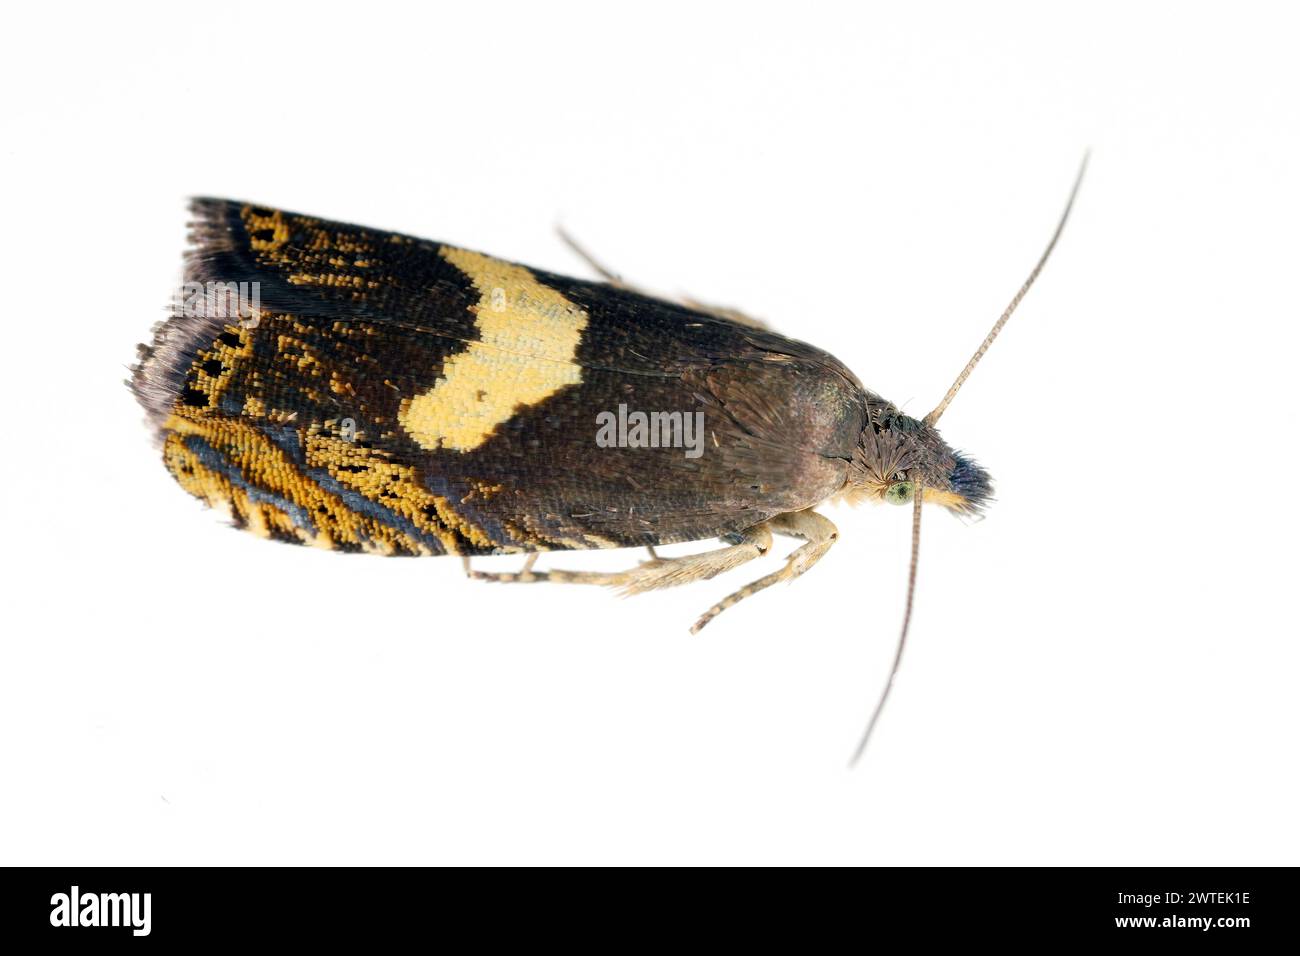 Common drill (Dichrorampha petiverella). Beautiful moth of the family Tortricidae, leafroller moths. Stock Photo